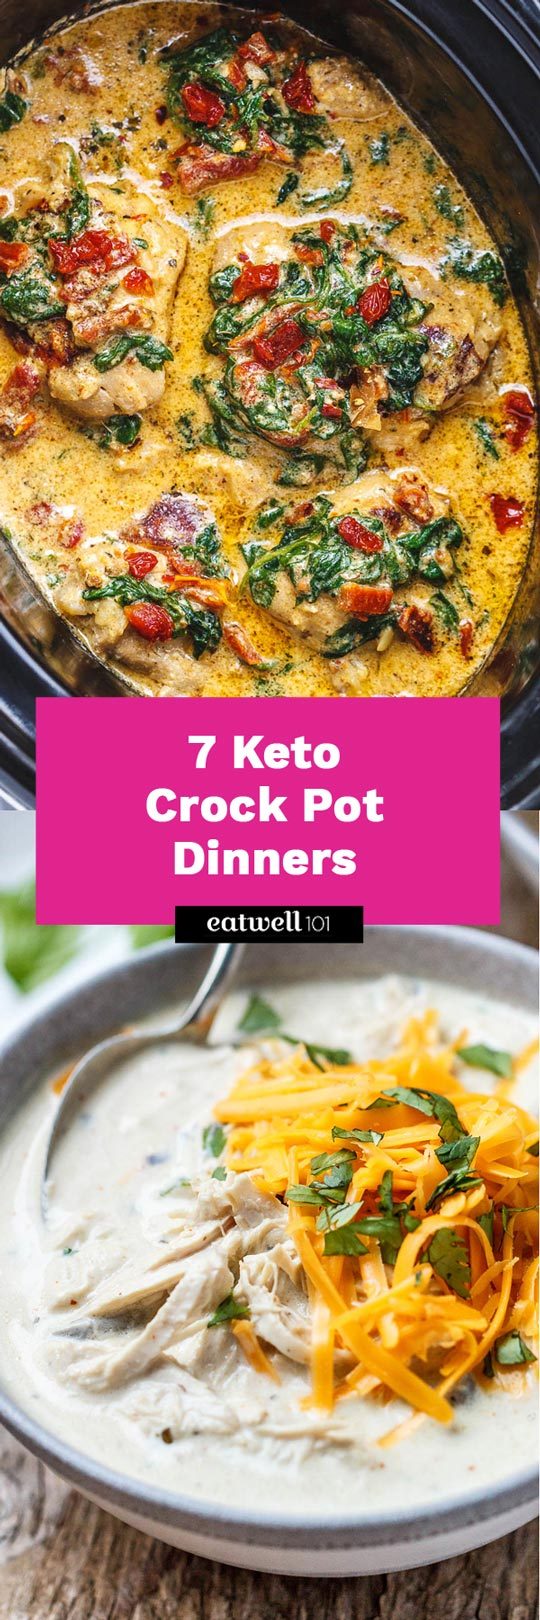 Keto Crock-Pot Recipes - These Keto Crock-Pot recipes are packed with nutritive ingredients!